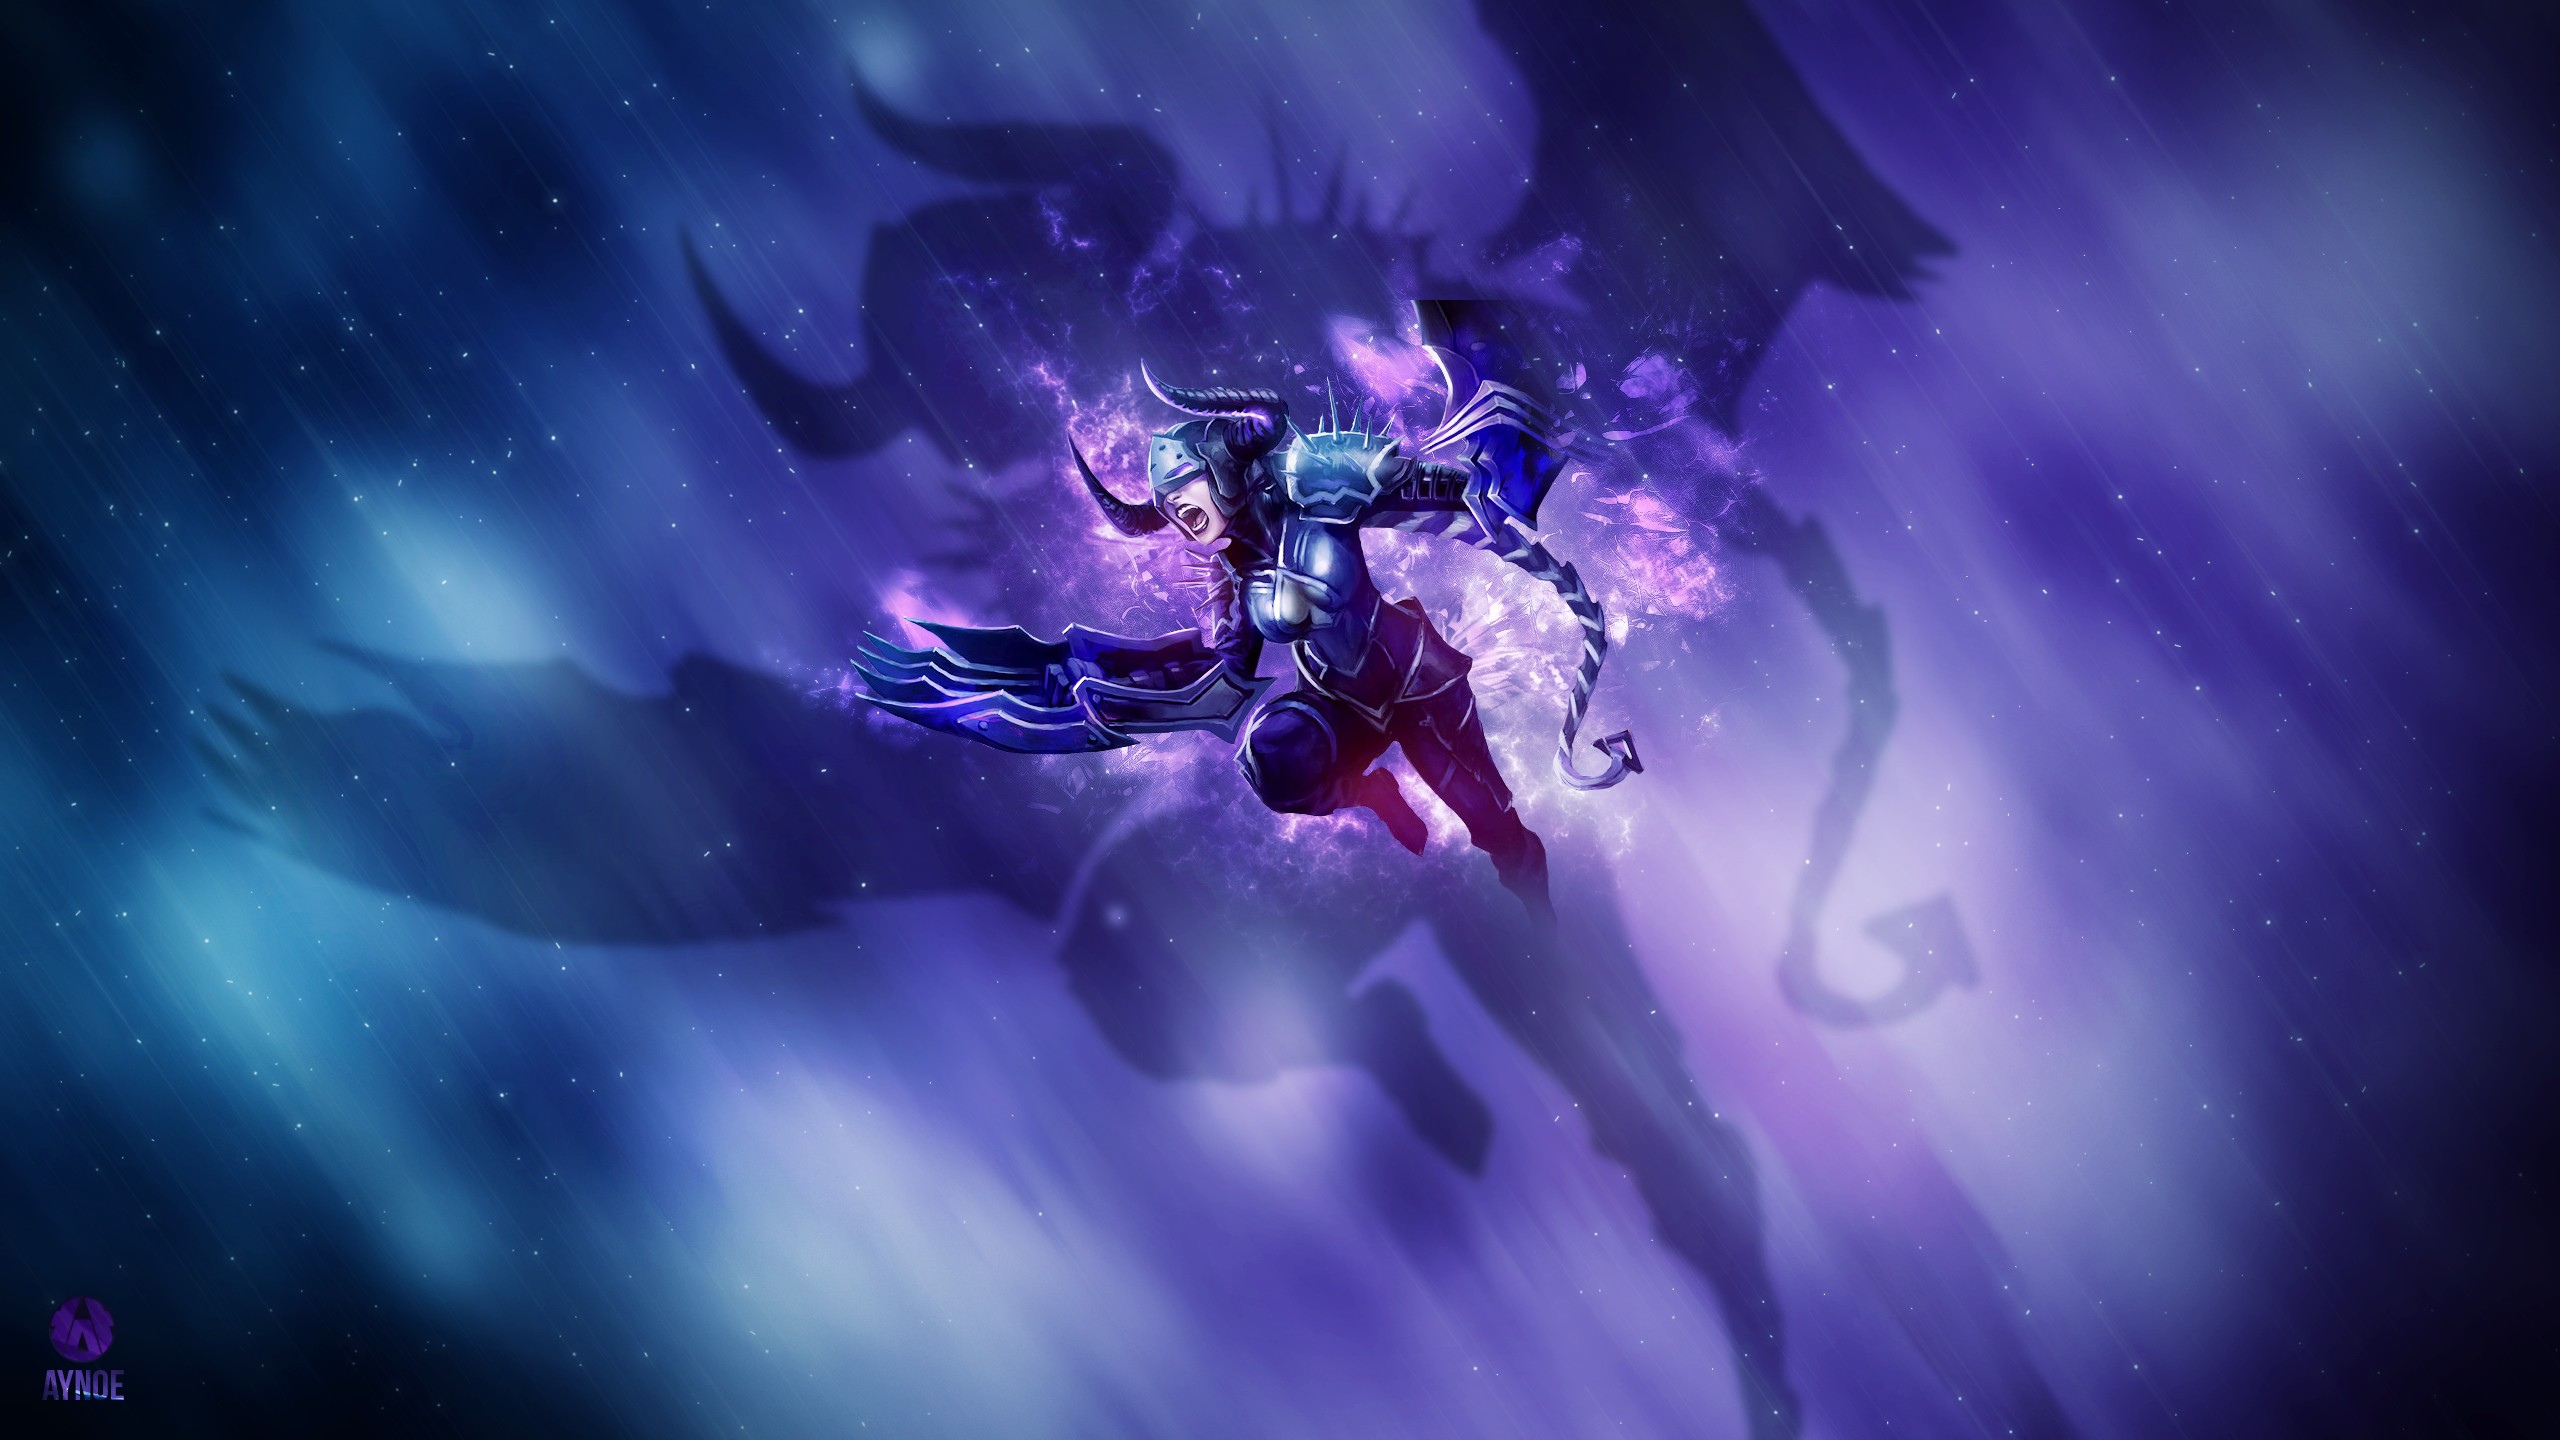 General 2560x1440 PC gaming League of Legends video game art